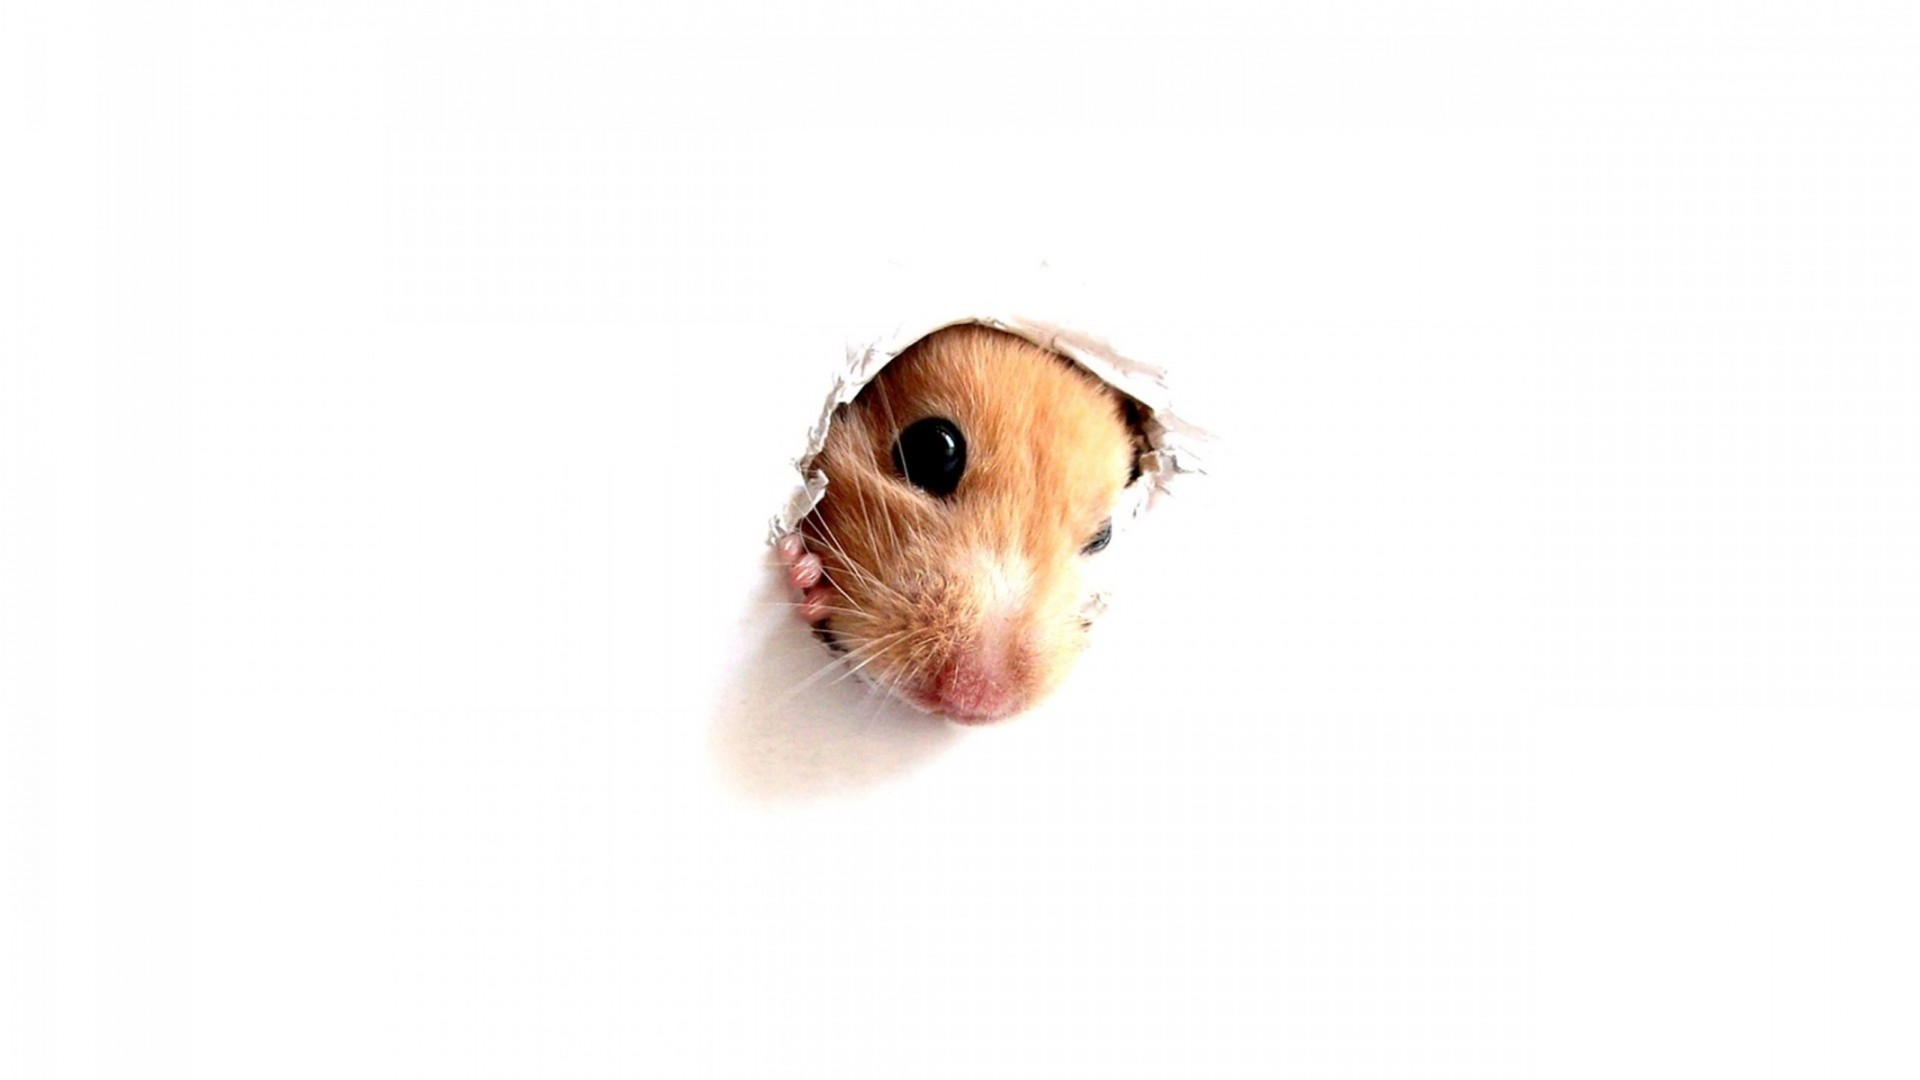 animals cute funny animal little isolated pet one rodent nature young